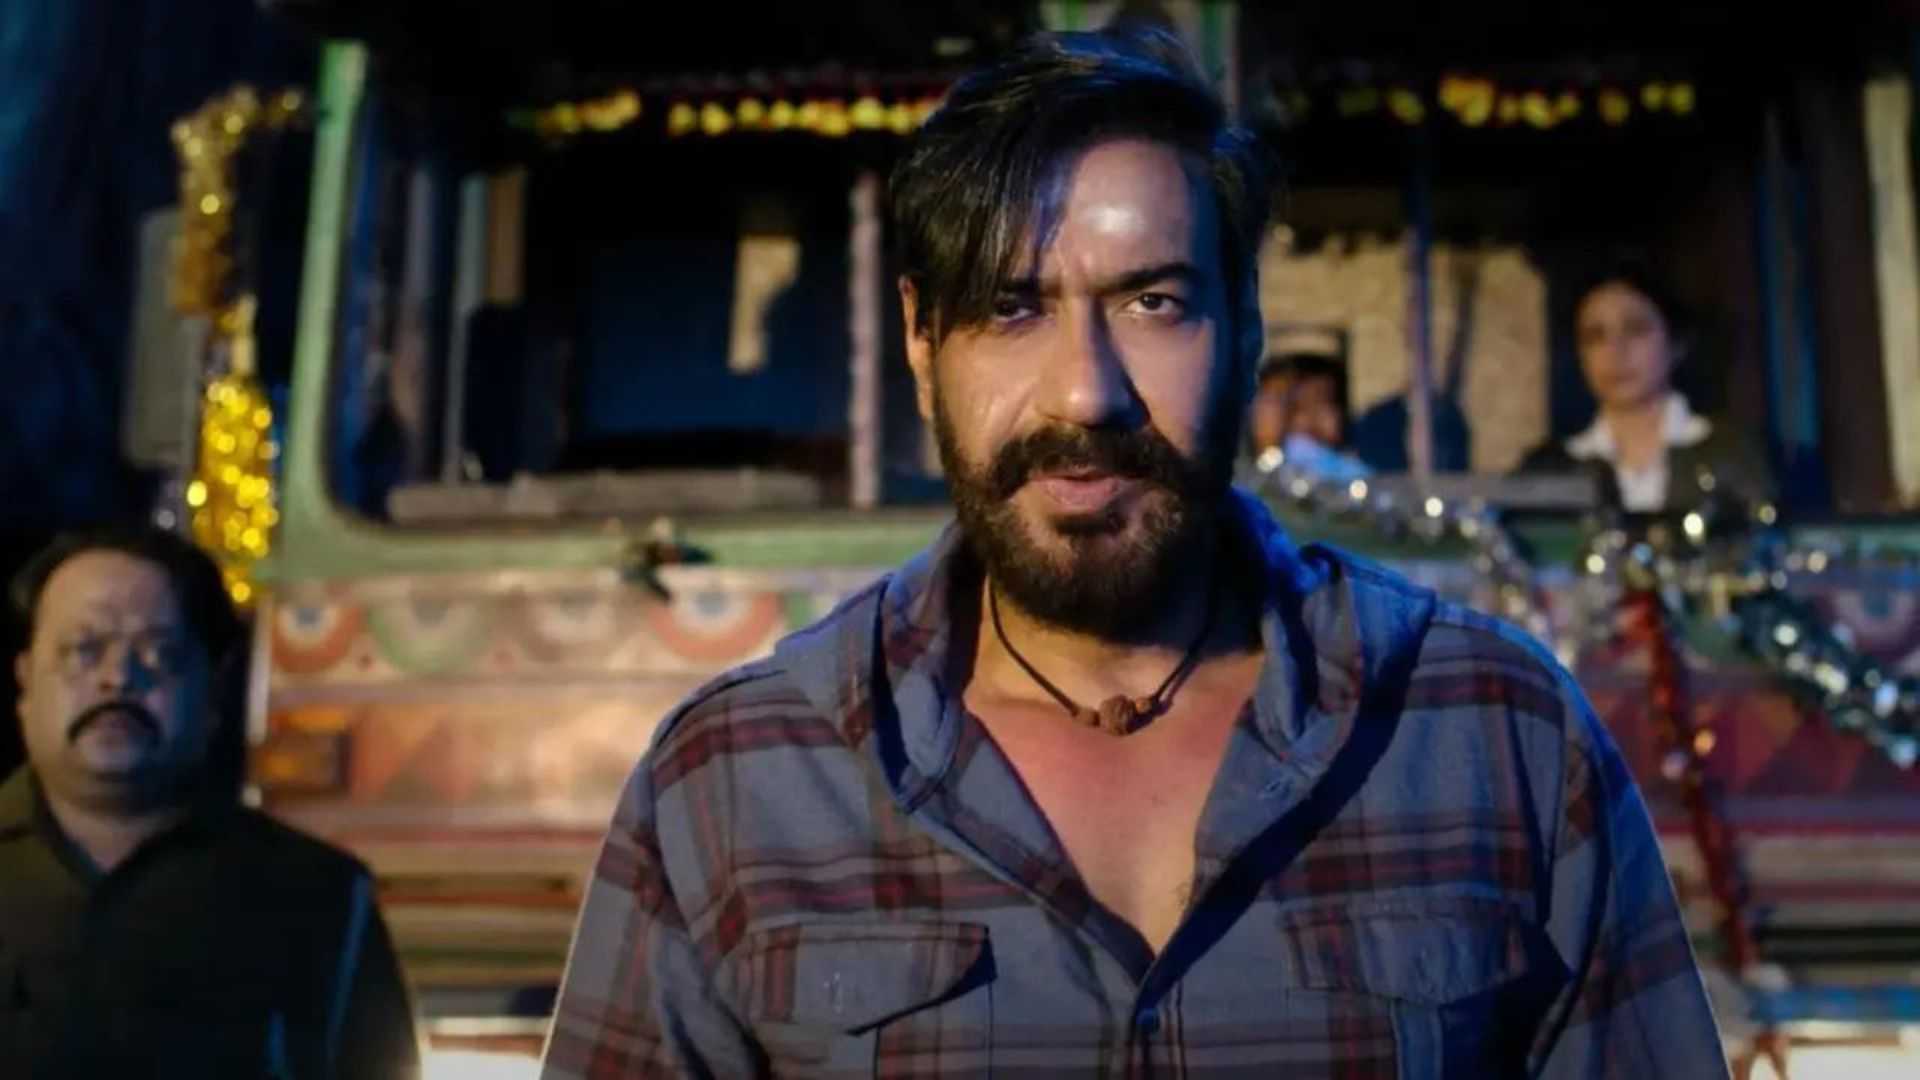 Bholaa box office day 2: Ajay Devgn starrer sees a dip in collections, needs an improvement over the weekend